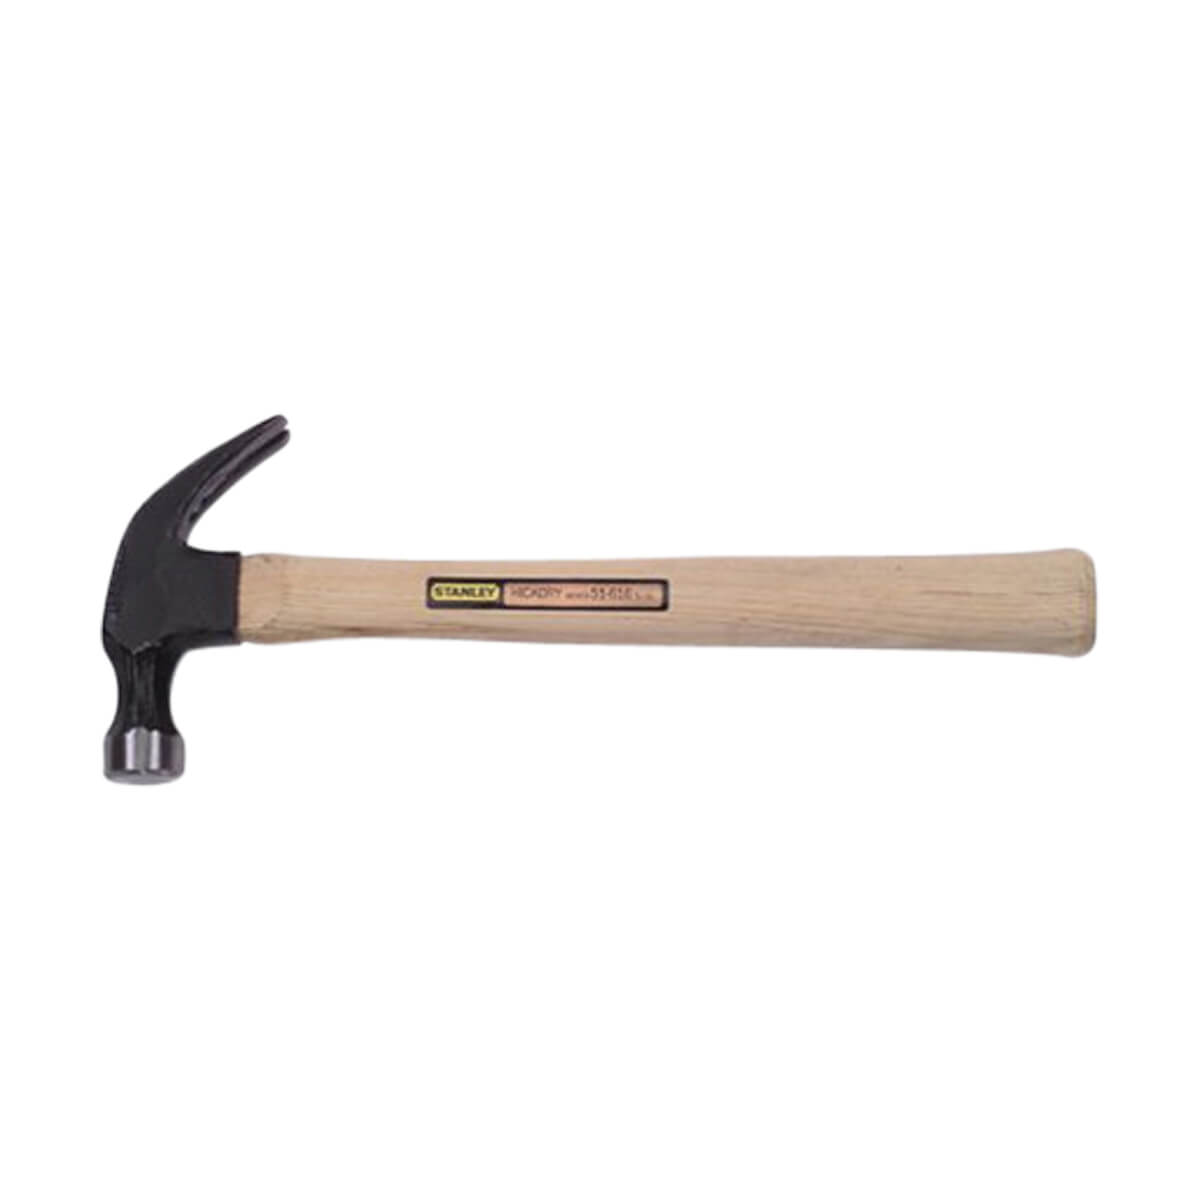 Stanley Nail Hammer With Wood Handle - 16 oz